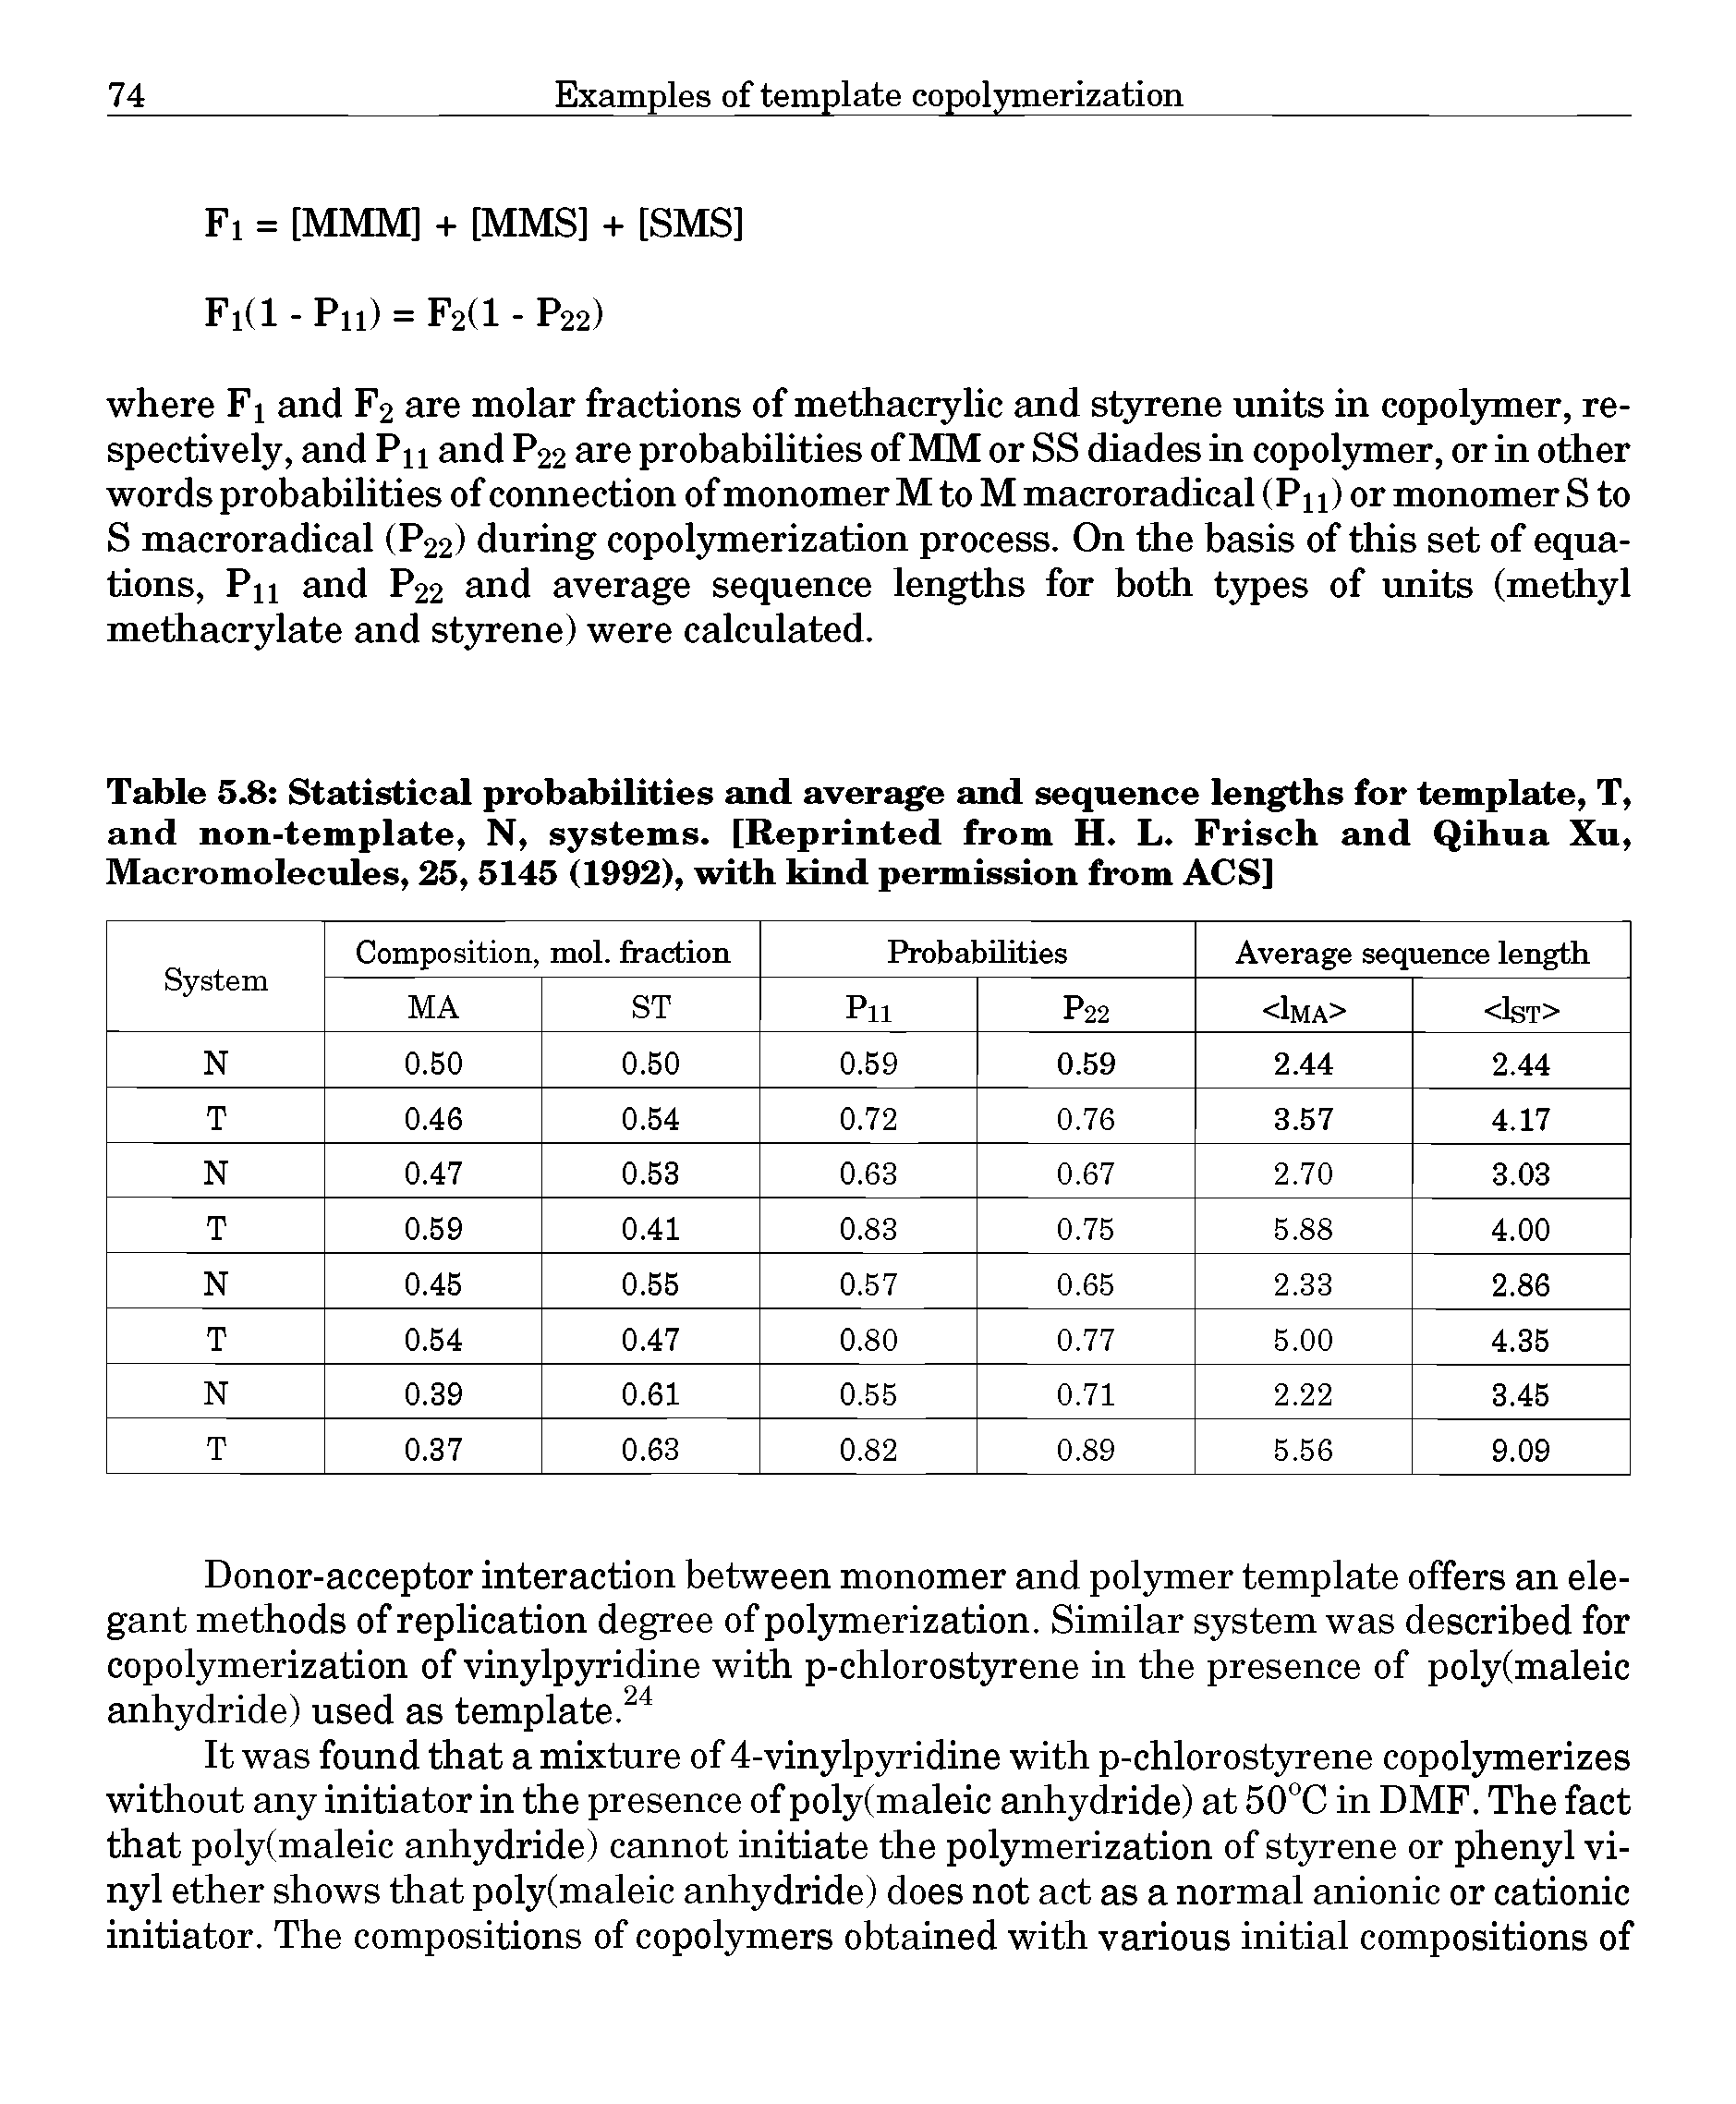 Table 5.8 Statistical probabilities and average and sequence lengths for template, T, and non-template, N, systems. [Reprinted from H. L. Frisch and Qihua Xu, Macromolecules, 25, 5145 (1992), with kind permission from ACS]...